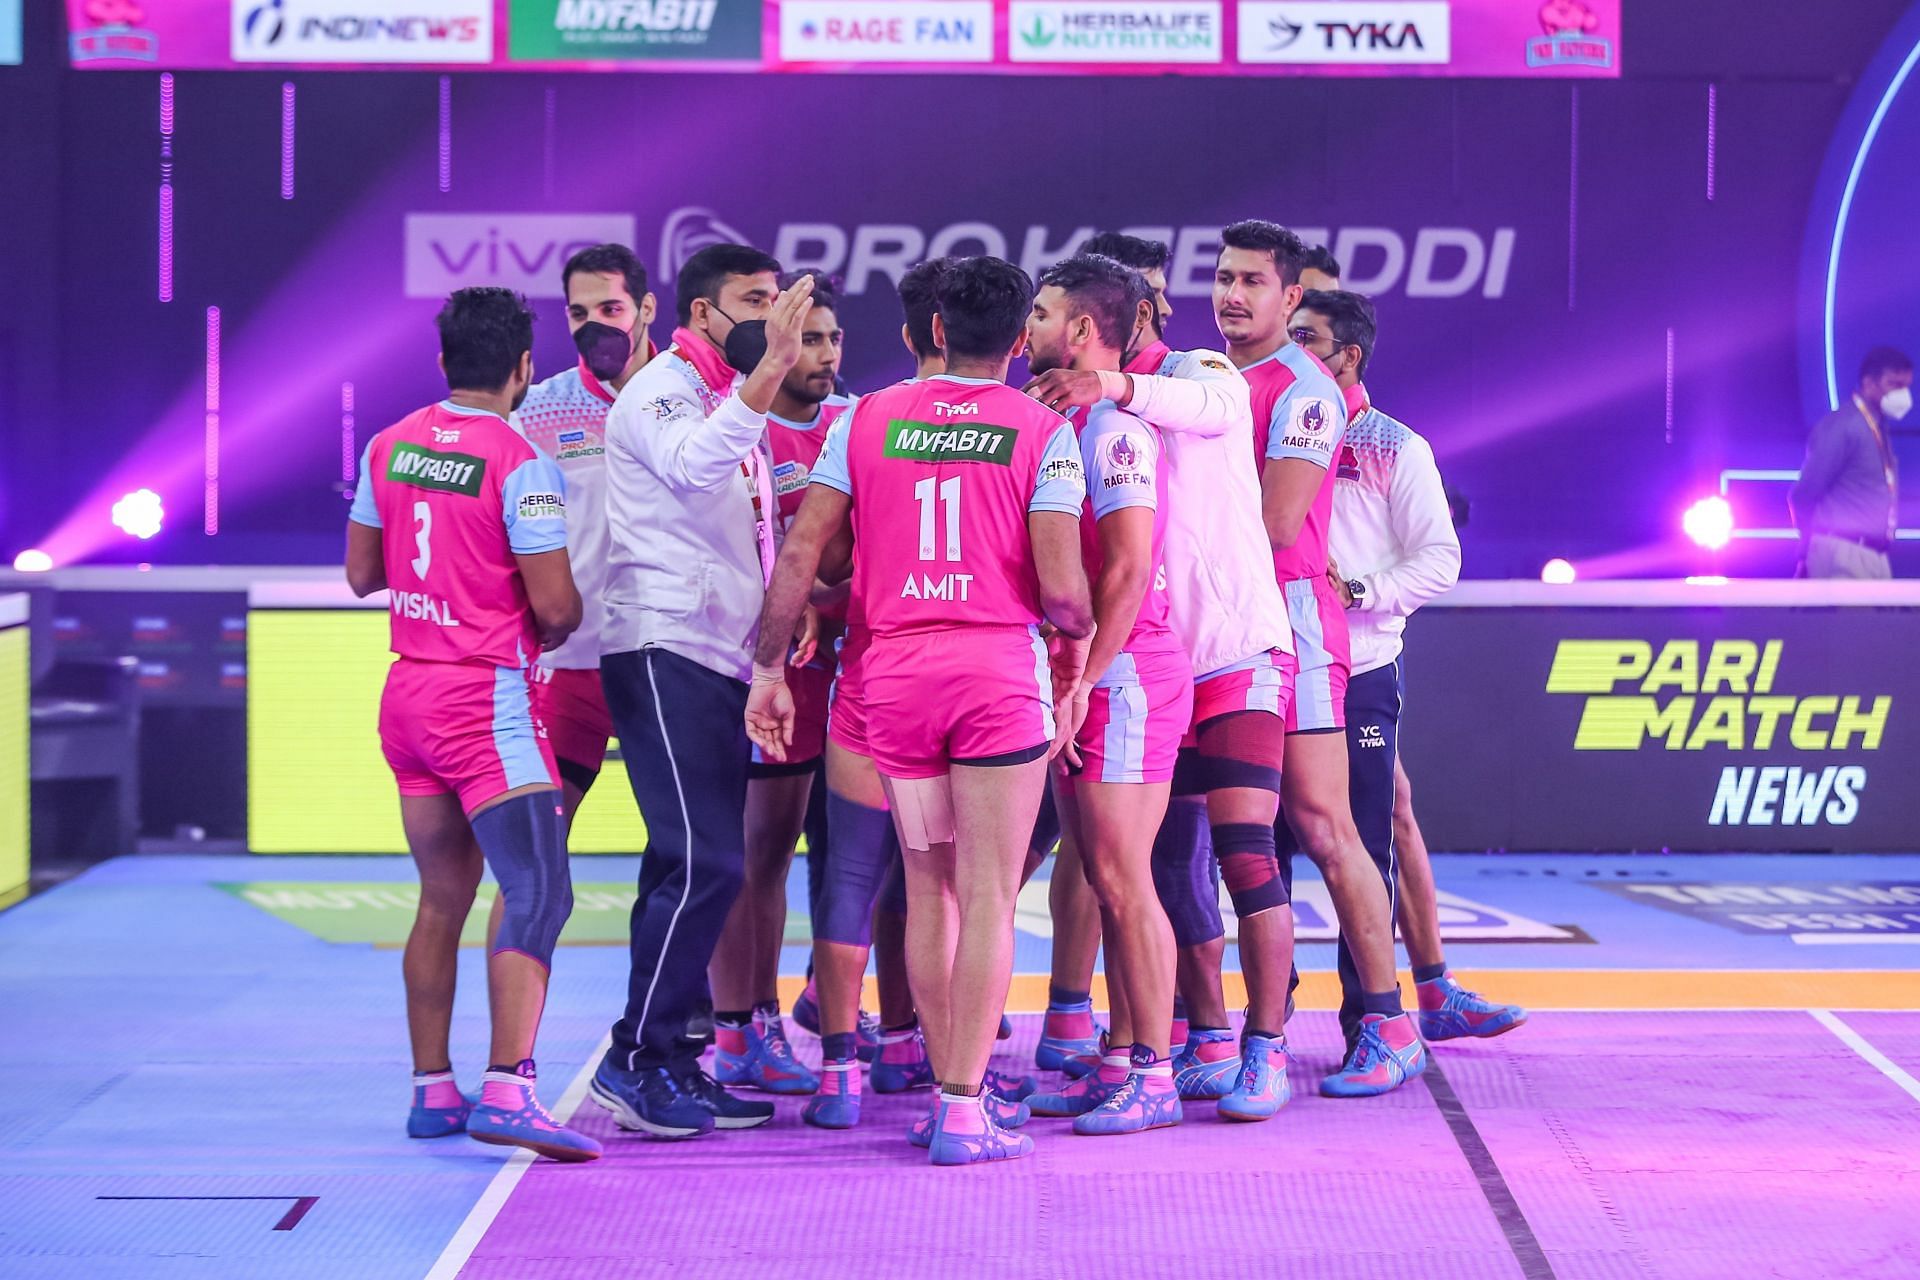 Pro Kabaddi League 2021-22, Jaipur Pink Panthers vs Dabang Delhi KC: Who will win today’s PKL match and telecast details